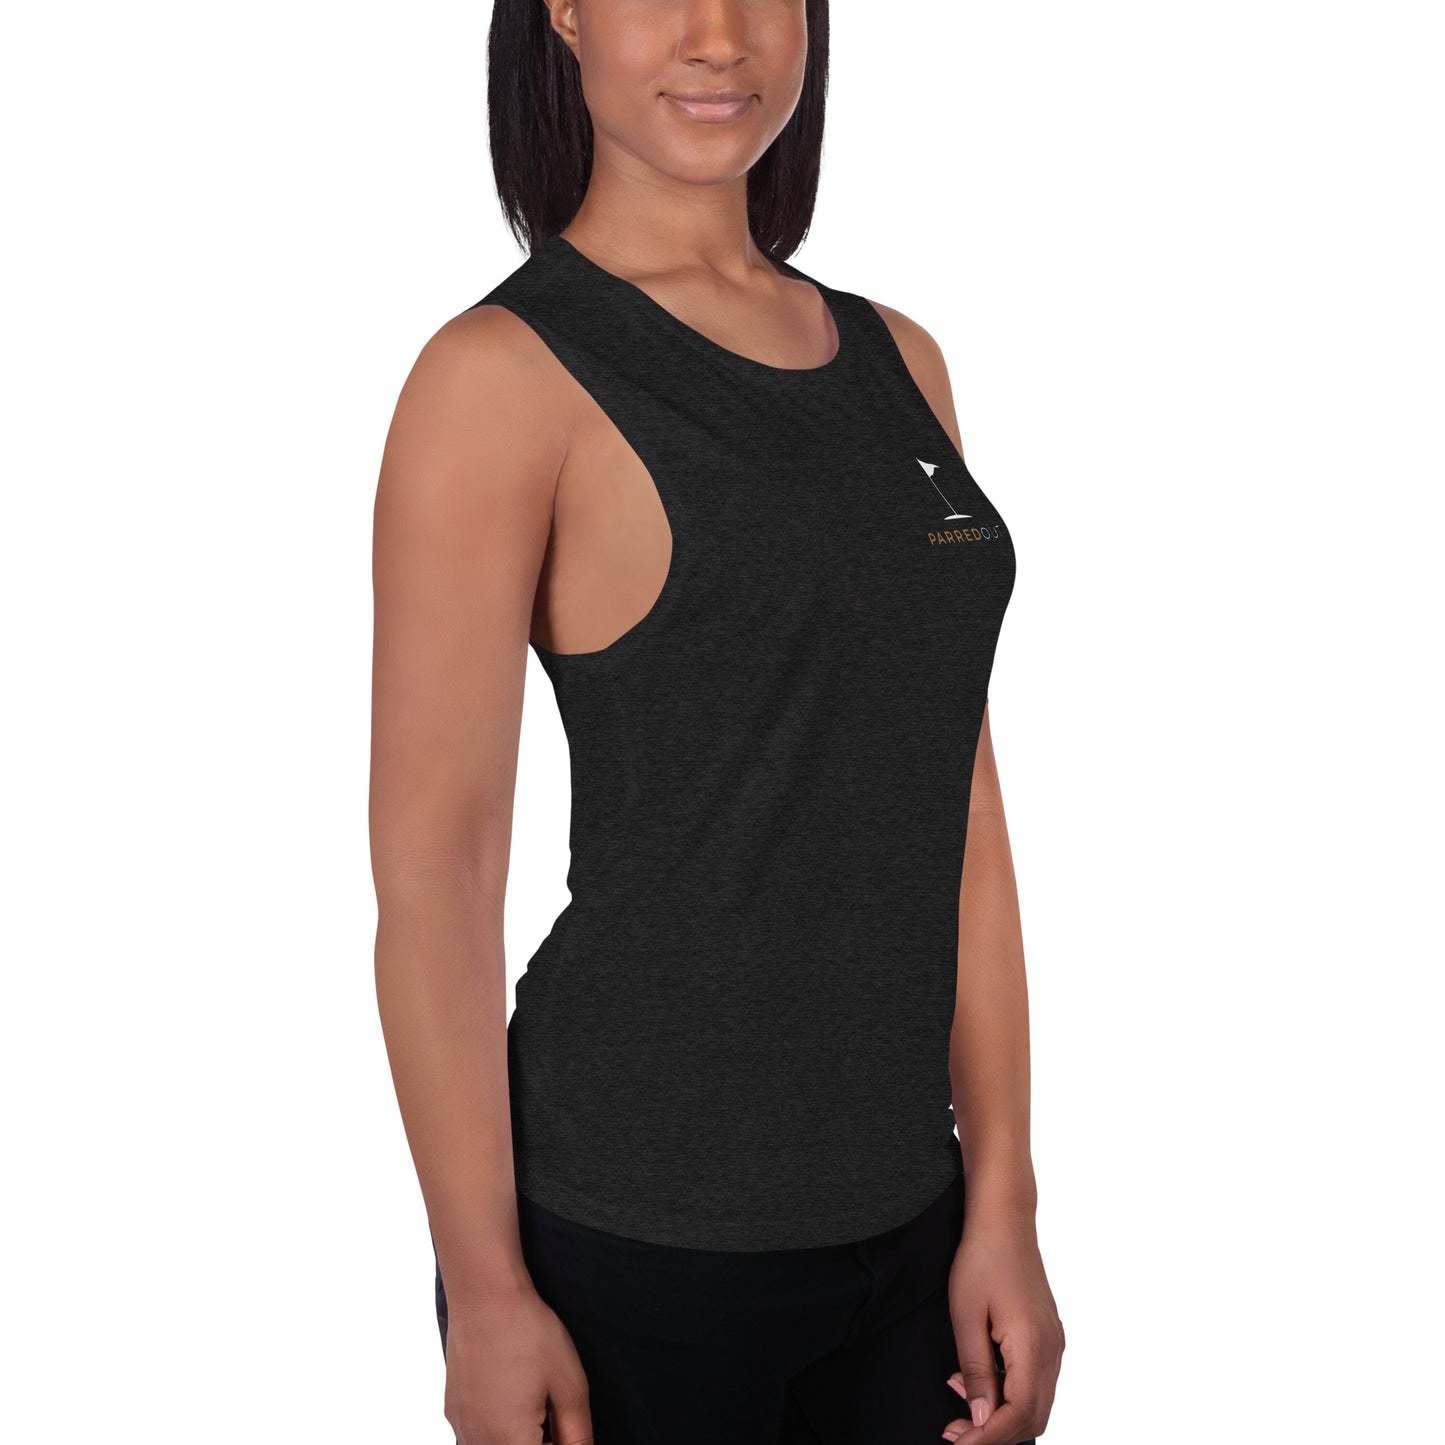 Parred Out Women's Tank Tee